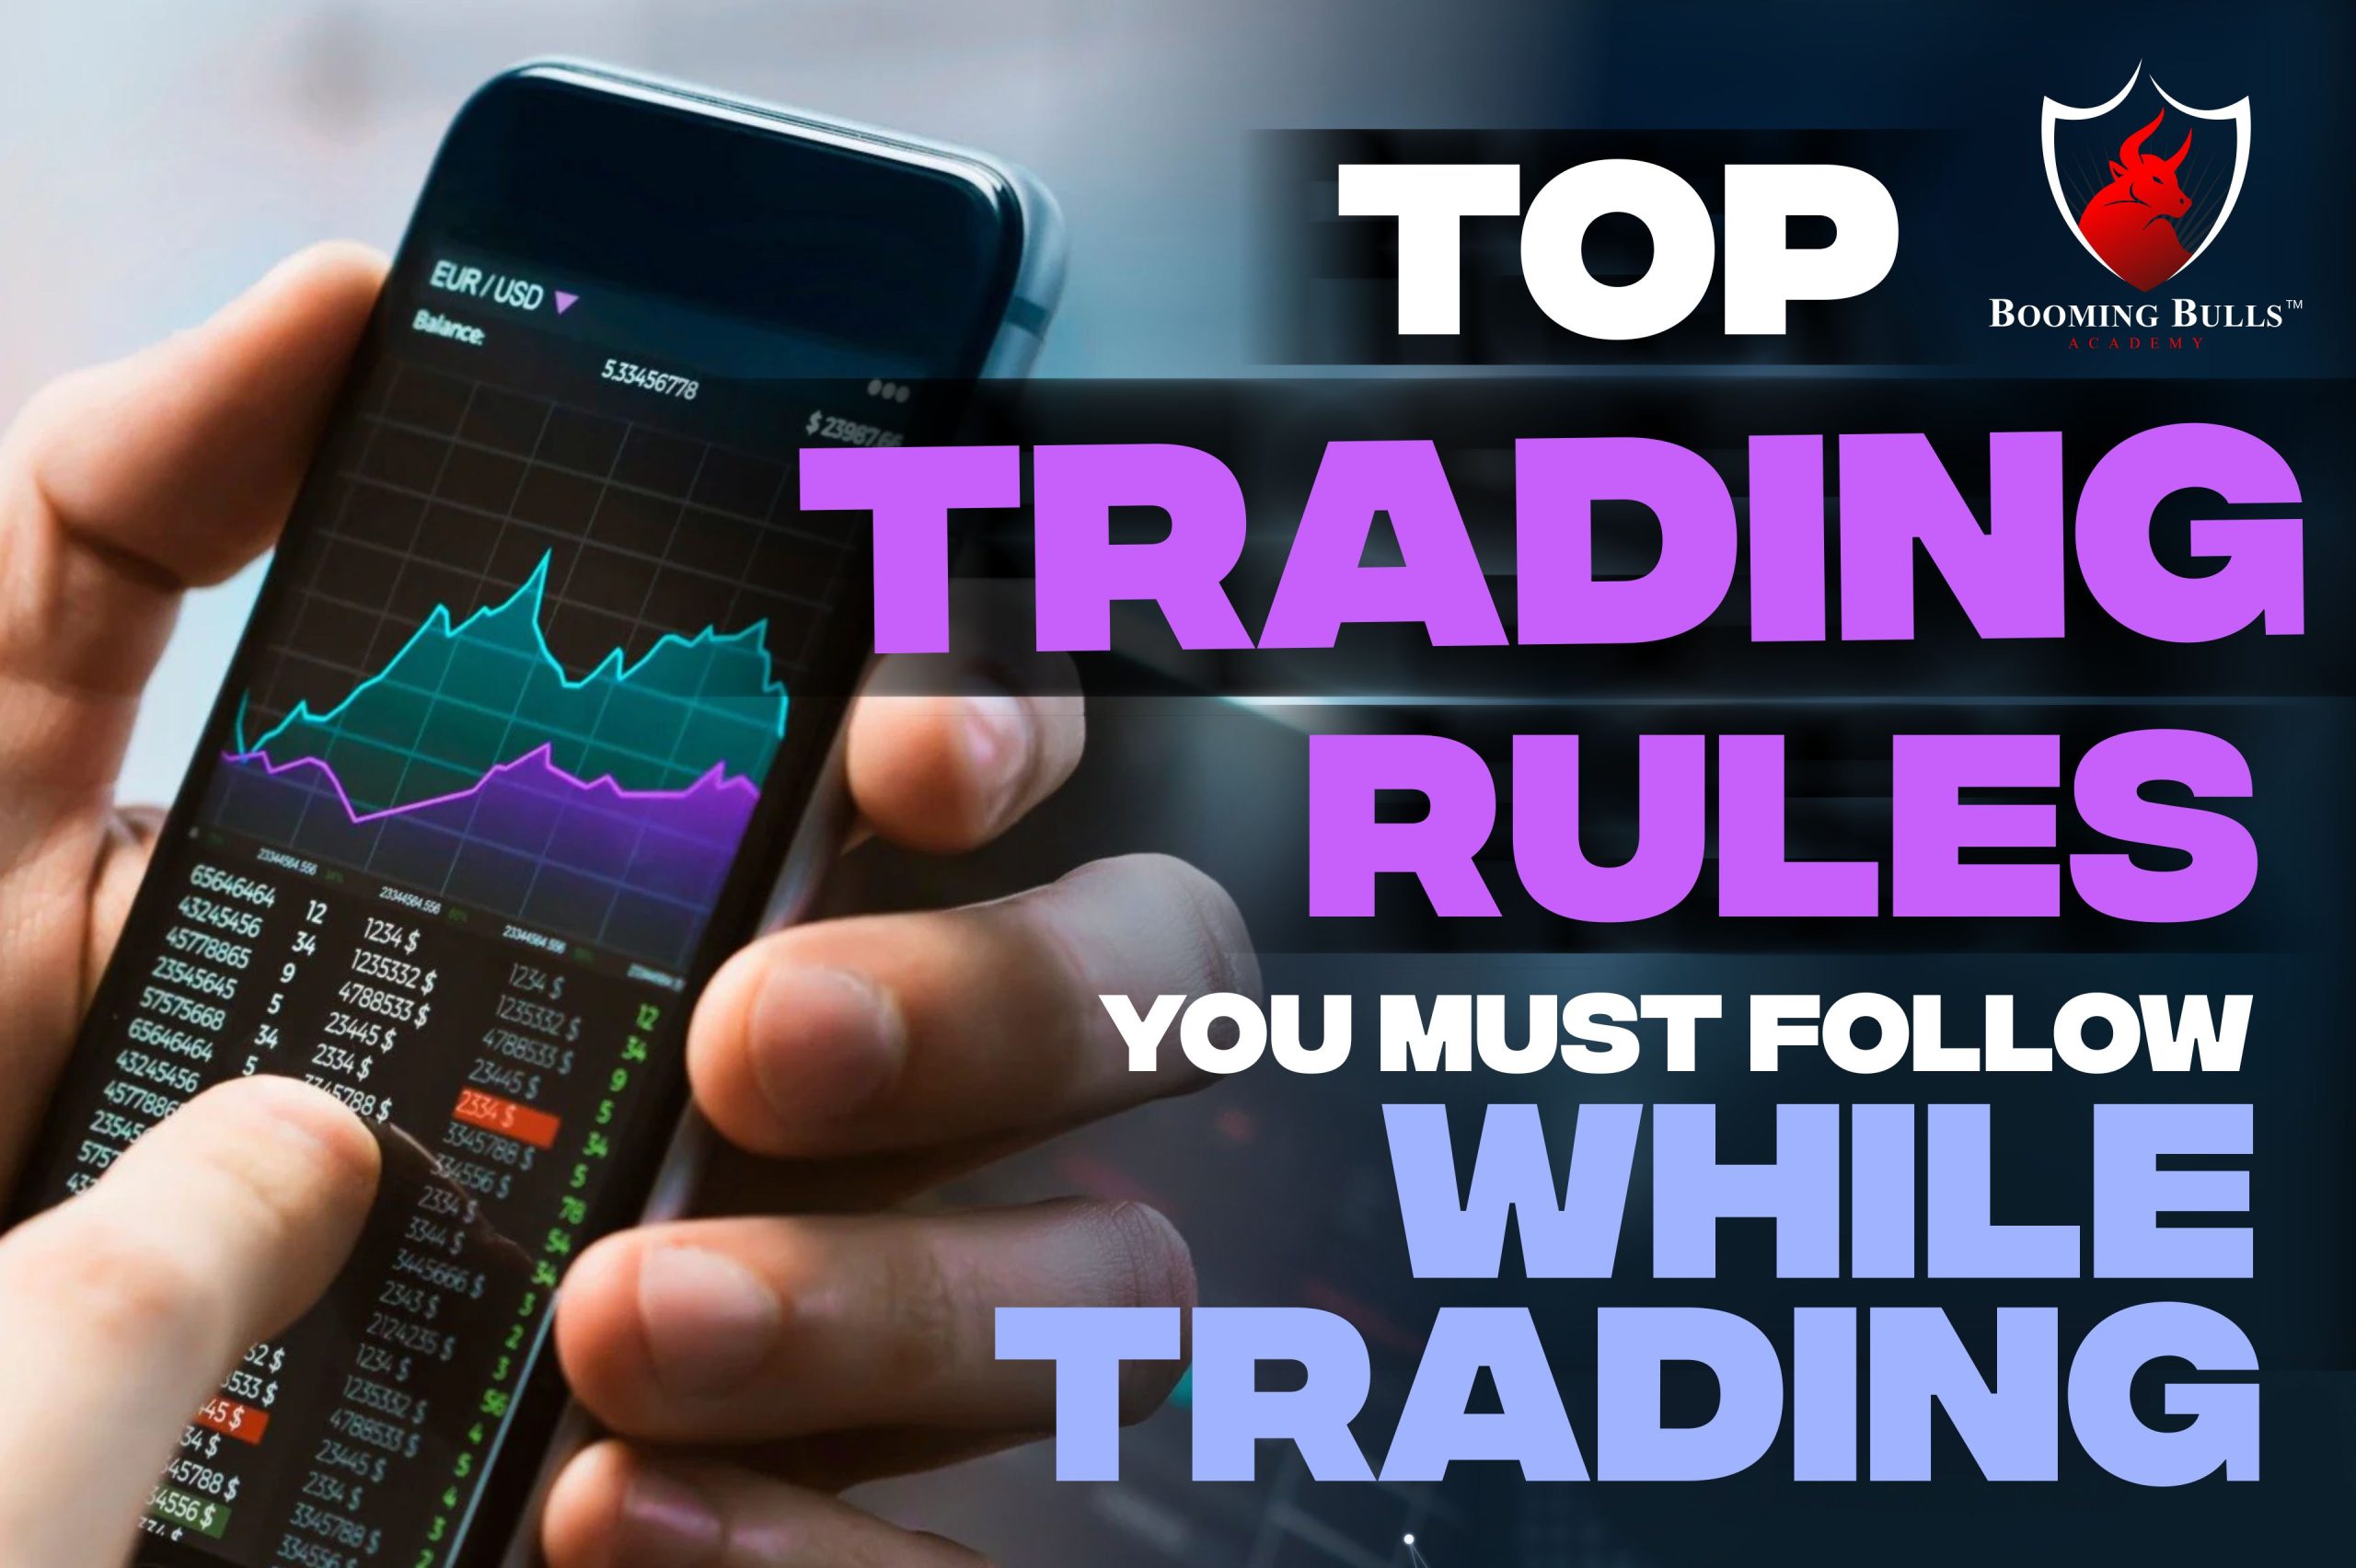 Top Trading Rules You Must Follow While Trading